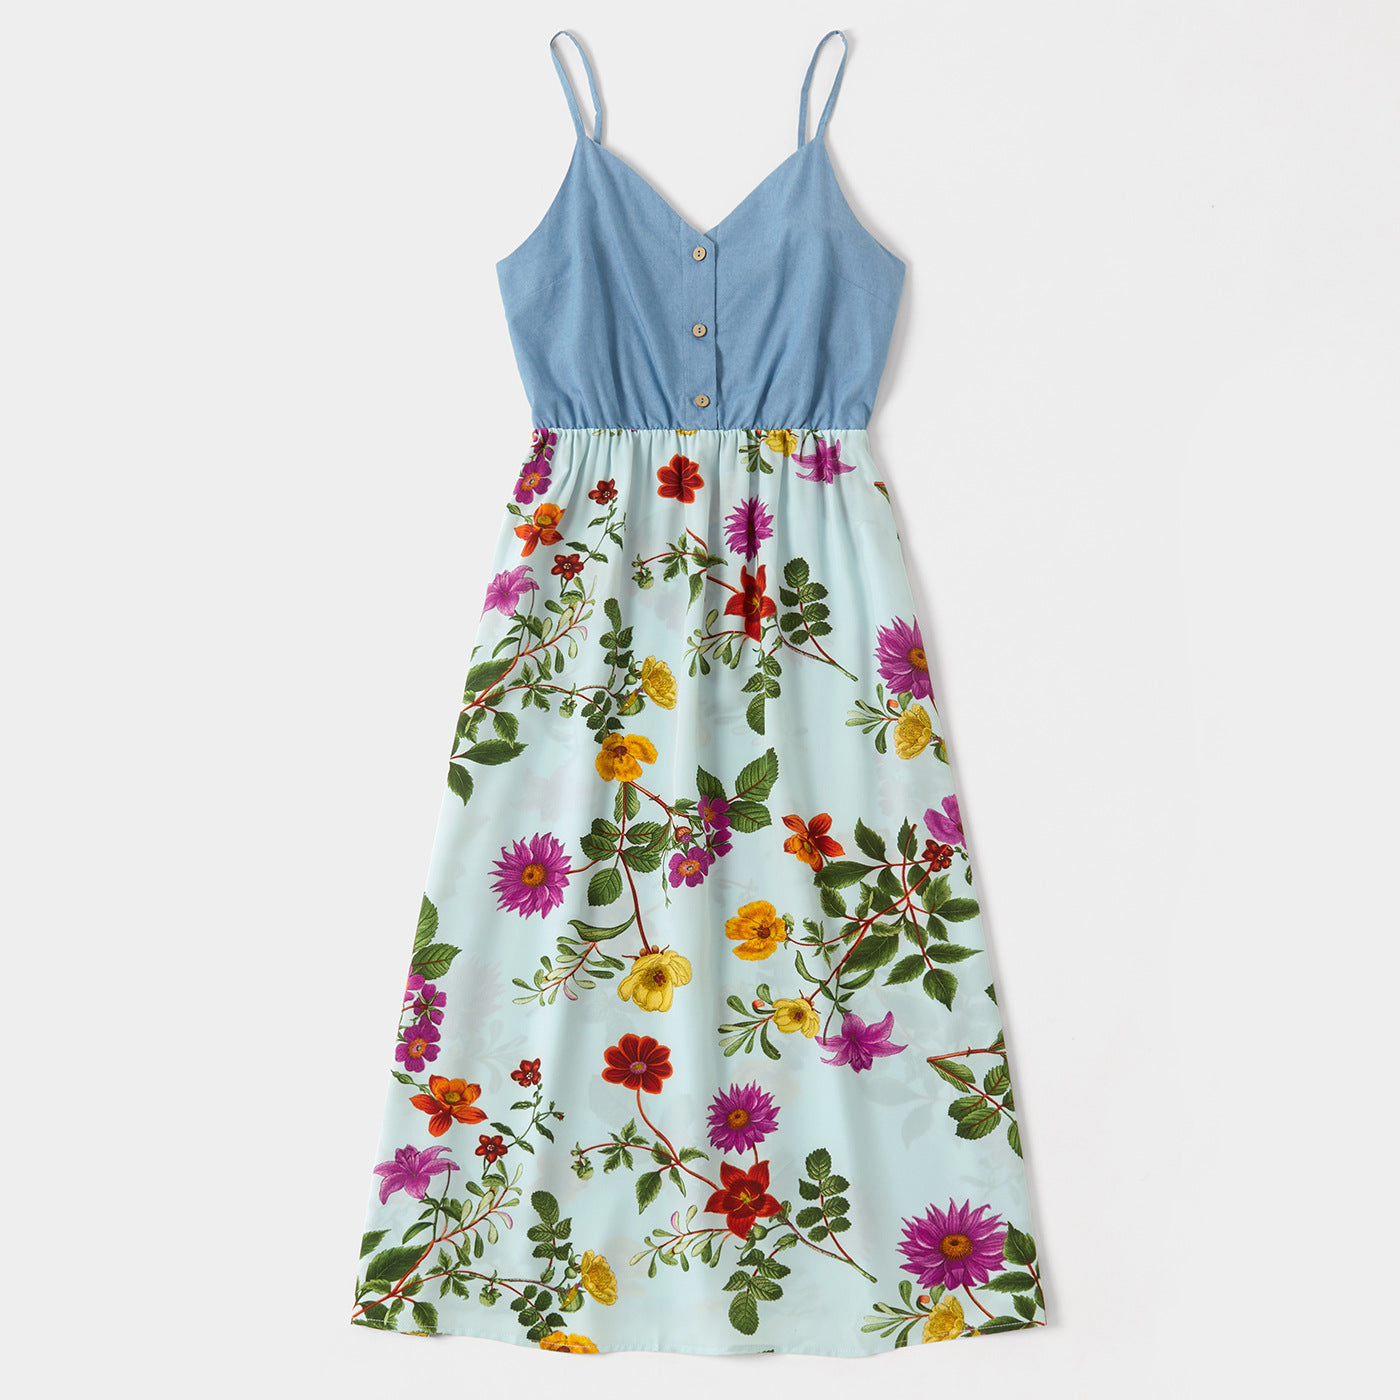 Floral Print Family Matching V Neck Sleeveless Dresses and T-shirts Sets